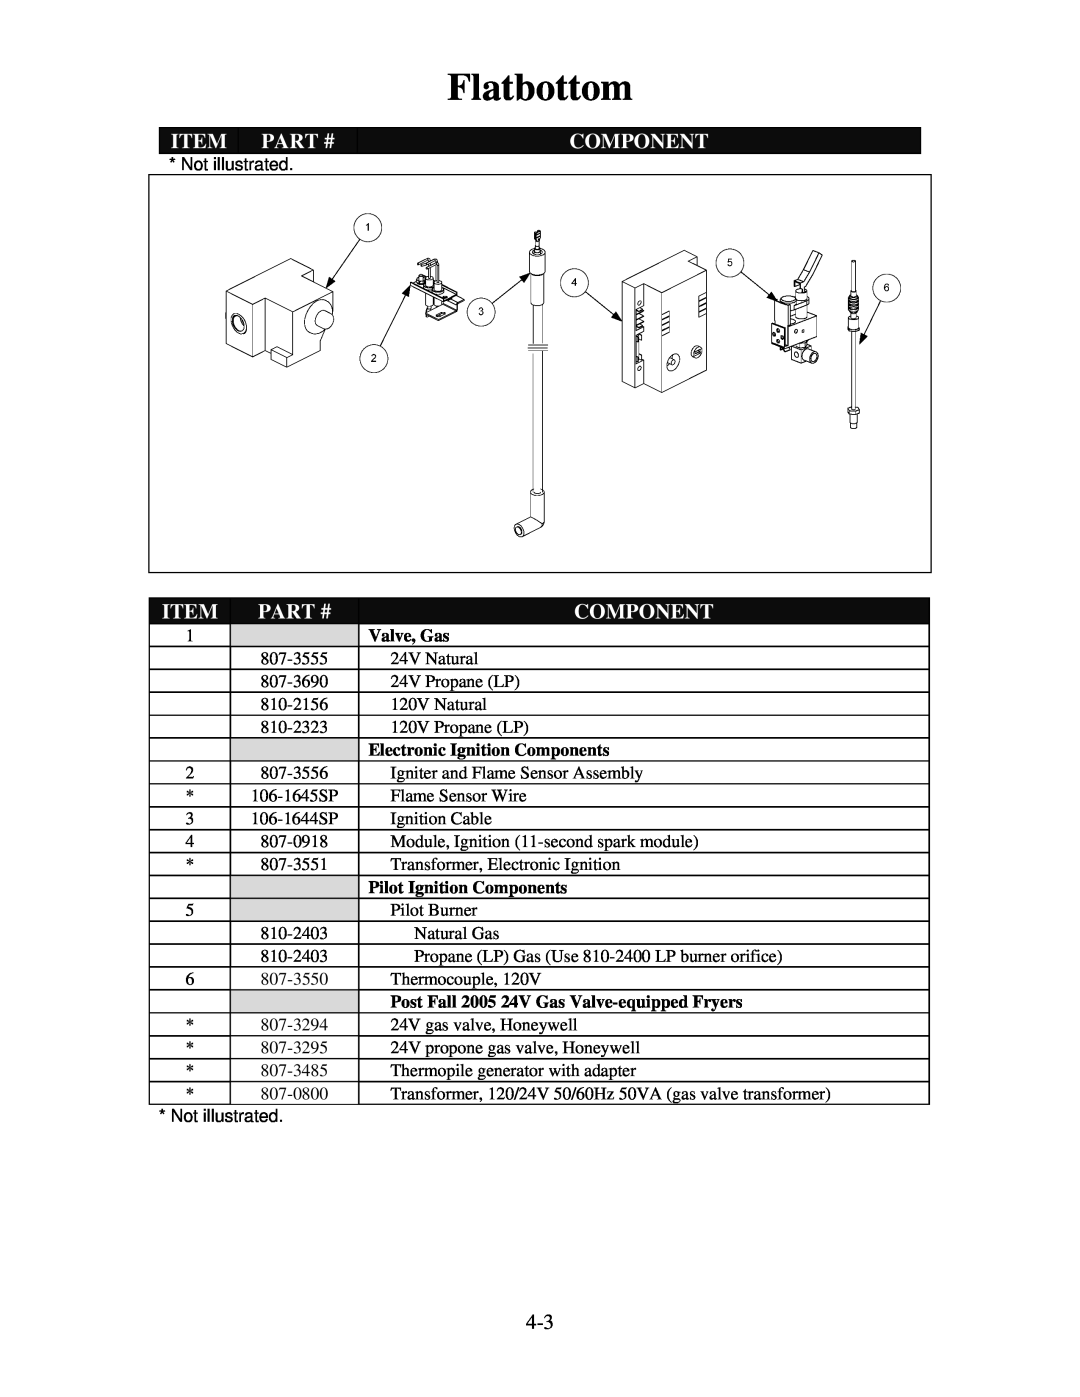 Frymaster 8196321 manual Flatbottom, Part #, Valve, Gas, Electronic Ignition Components, Pilot Ignition Components 